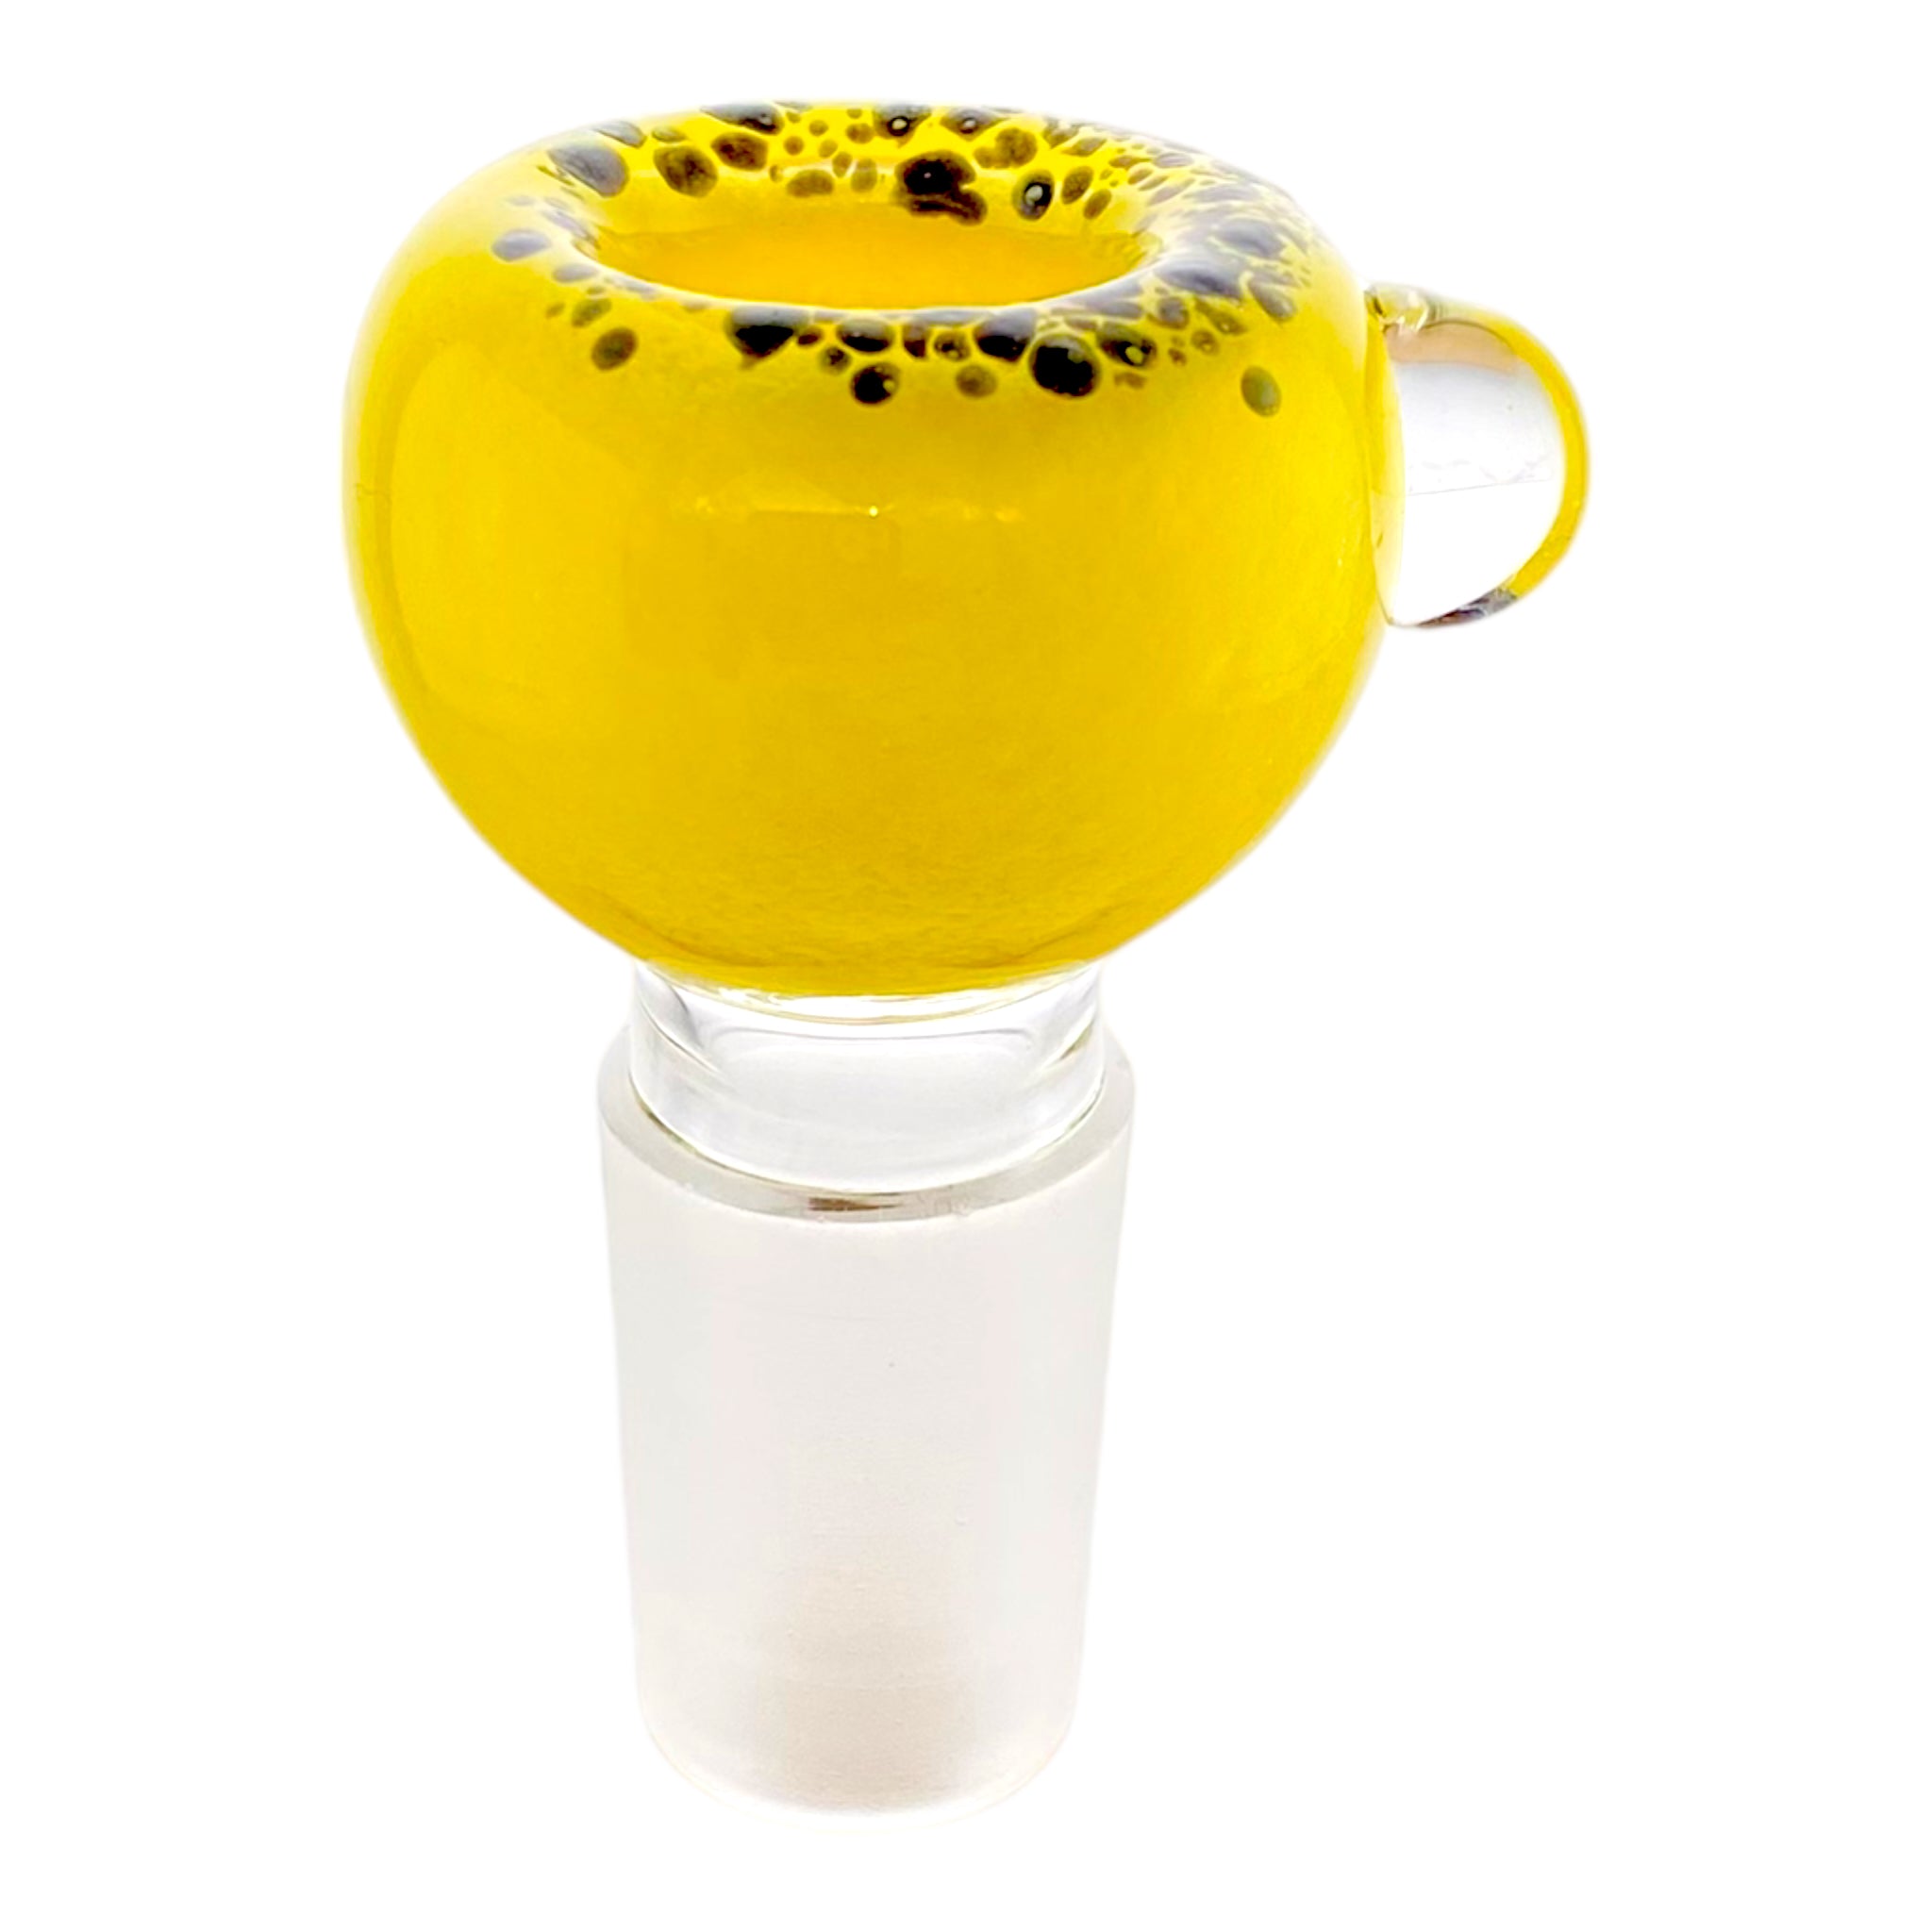 18mm Flower Bowl - Bubble With Frosted Rim Bong Bowl Piece - Yellow